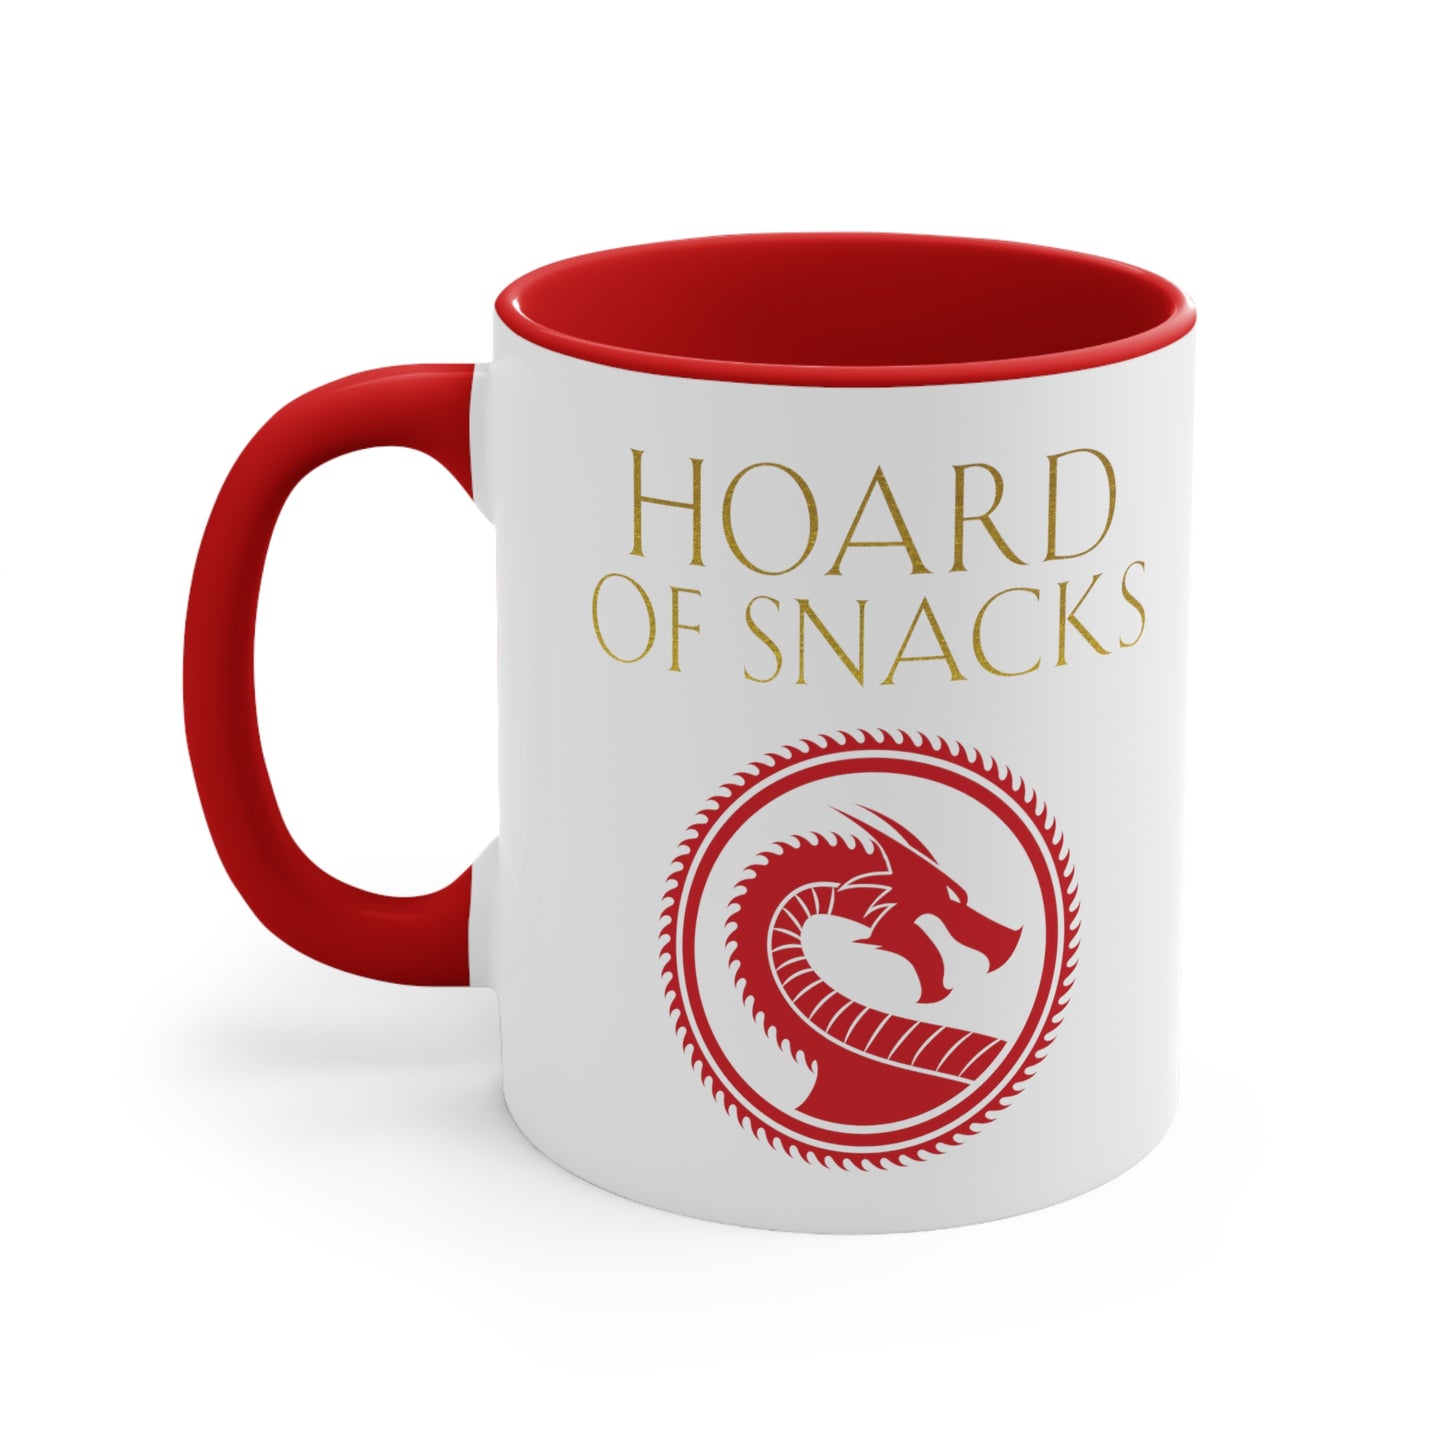 Soulbound: Hoard of Snacks Gold/Red Coffee Mug, 11oz